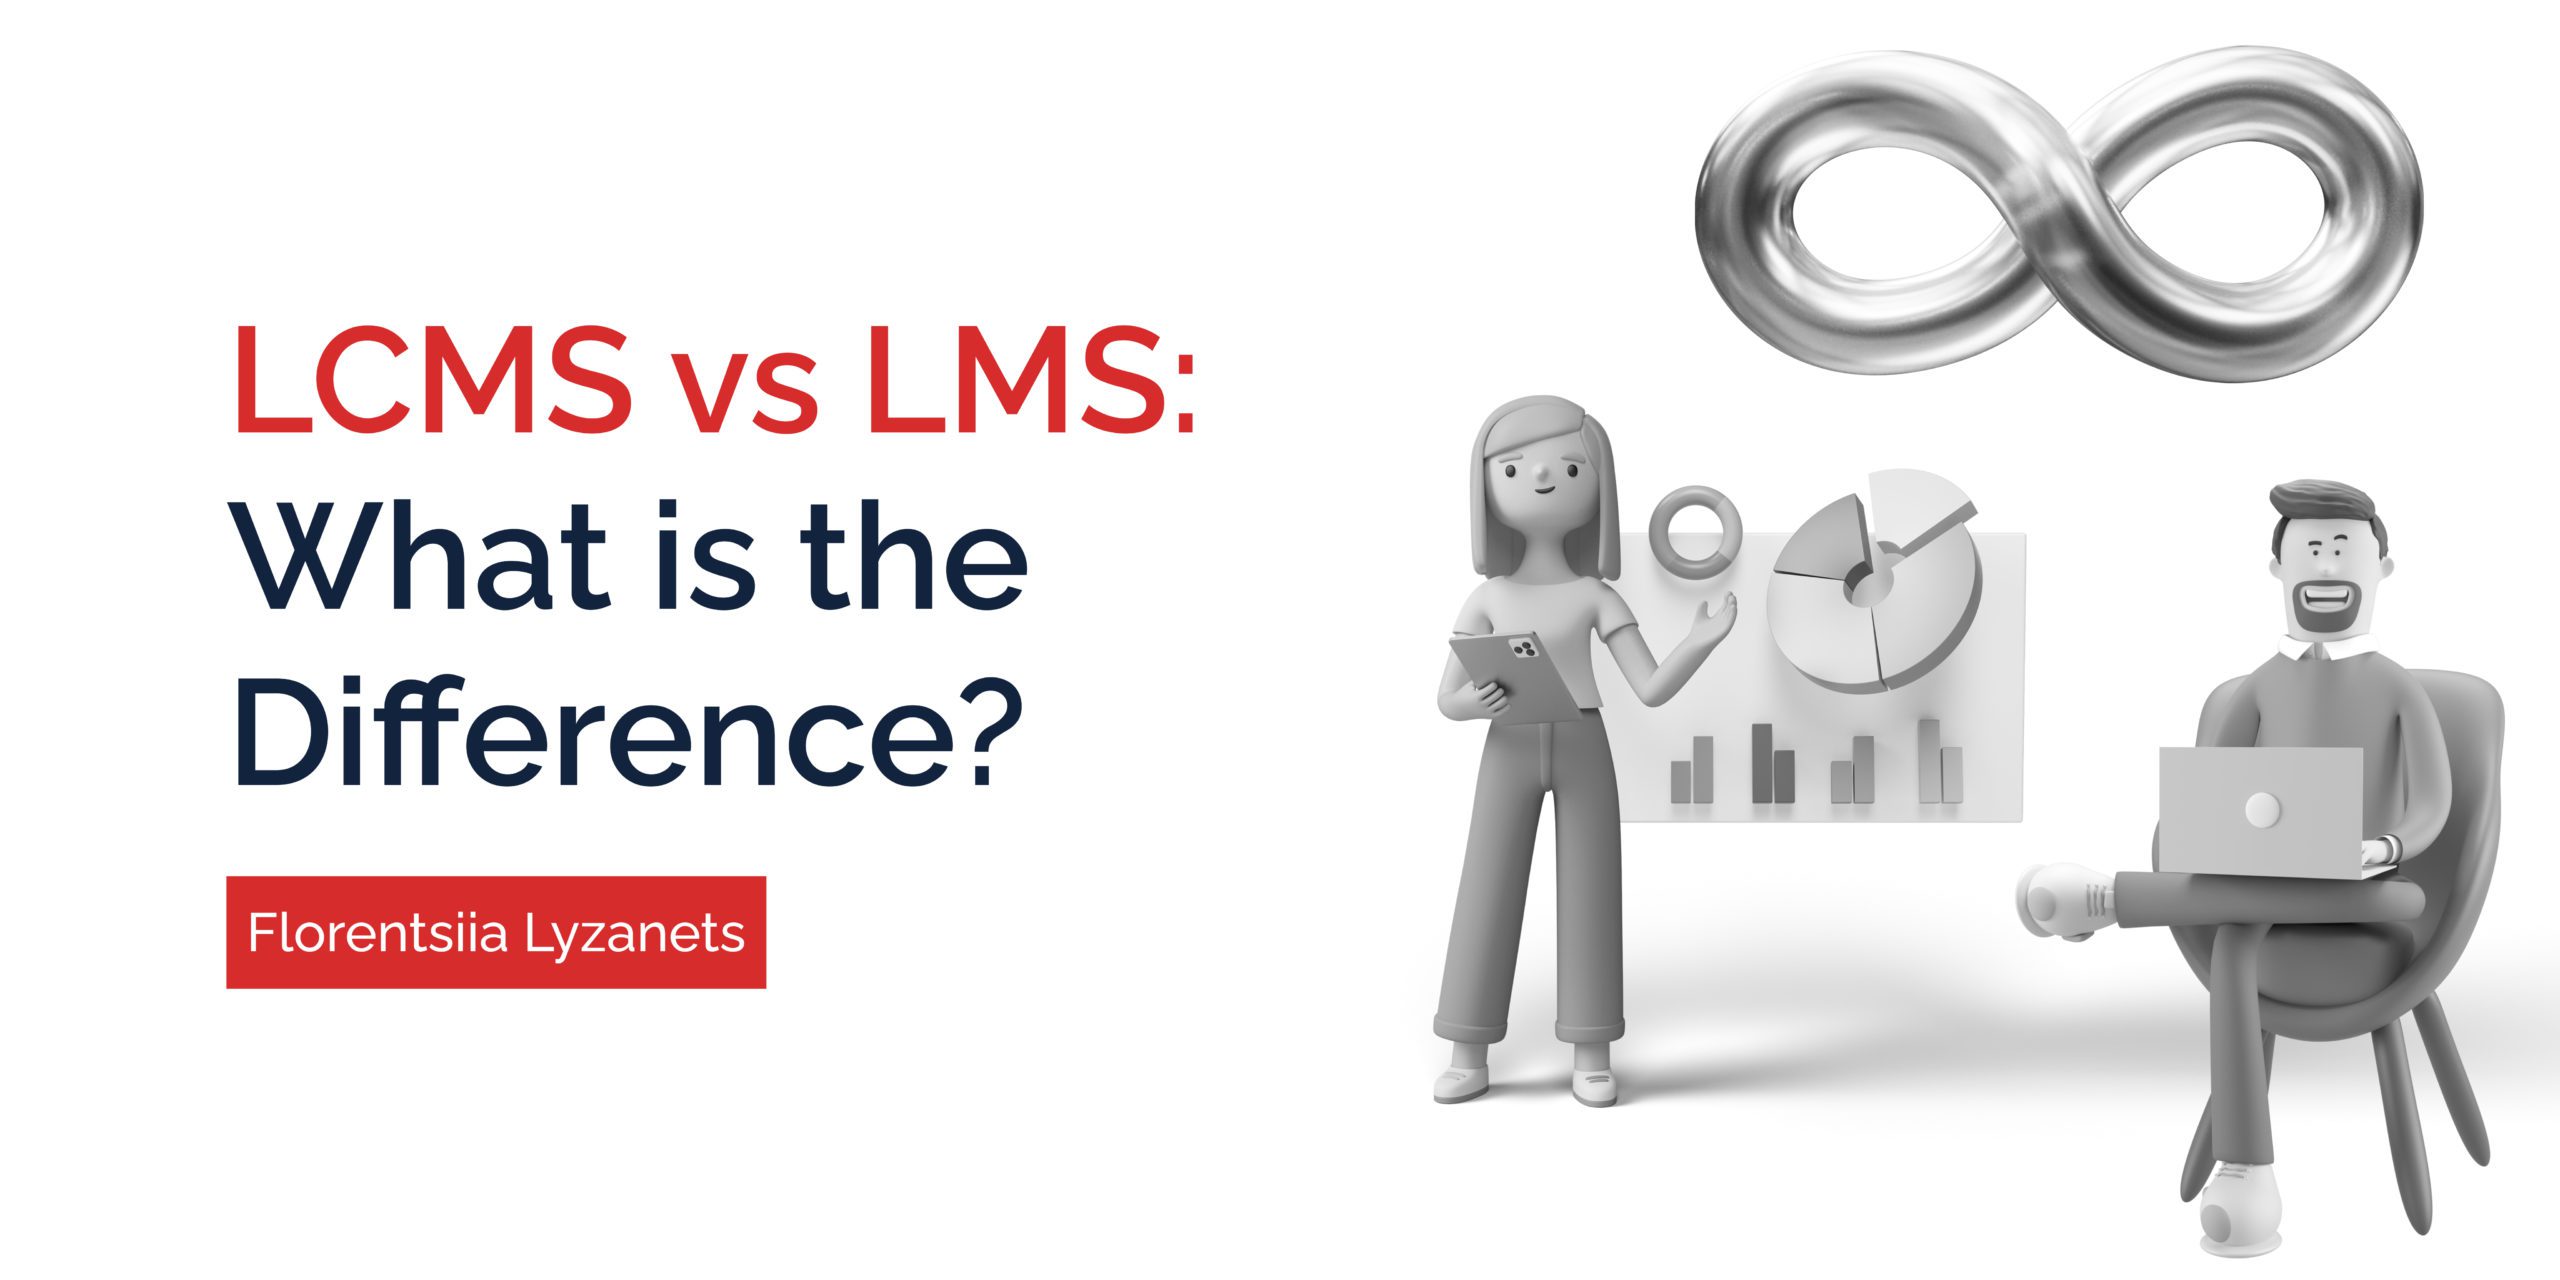 LCMS vs. LMS: What is the difference?